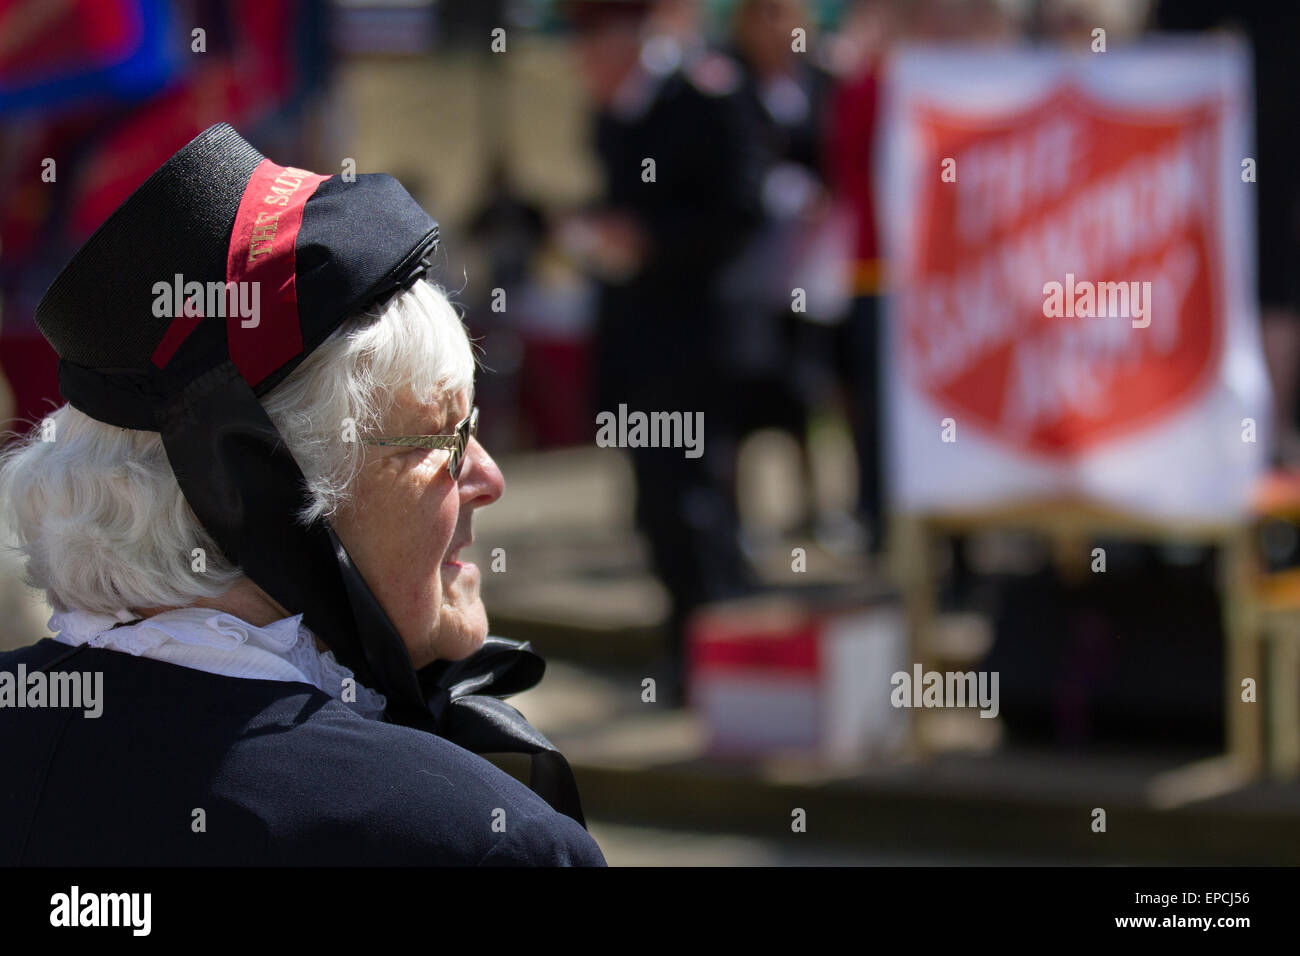 Southport, Merseyside UK, 16th May, 2015. Mrs Groom, celebrating150 years of the Salvation Army.  2015 marks the 150th anniversary of The Salvation Army. The movement was started by pioneers William and Catherine Booth in the East End of London in 1865. The Salvation Army Southport corps invited Salvationists and others in fundraising, with a series of events in the town centre including massed choirs and march. Credit:  Mar Photographics/Alamy Live News Stock Photo